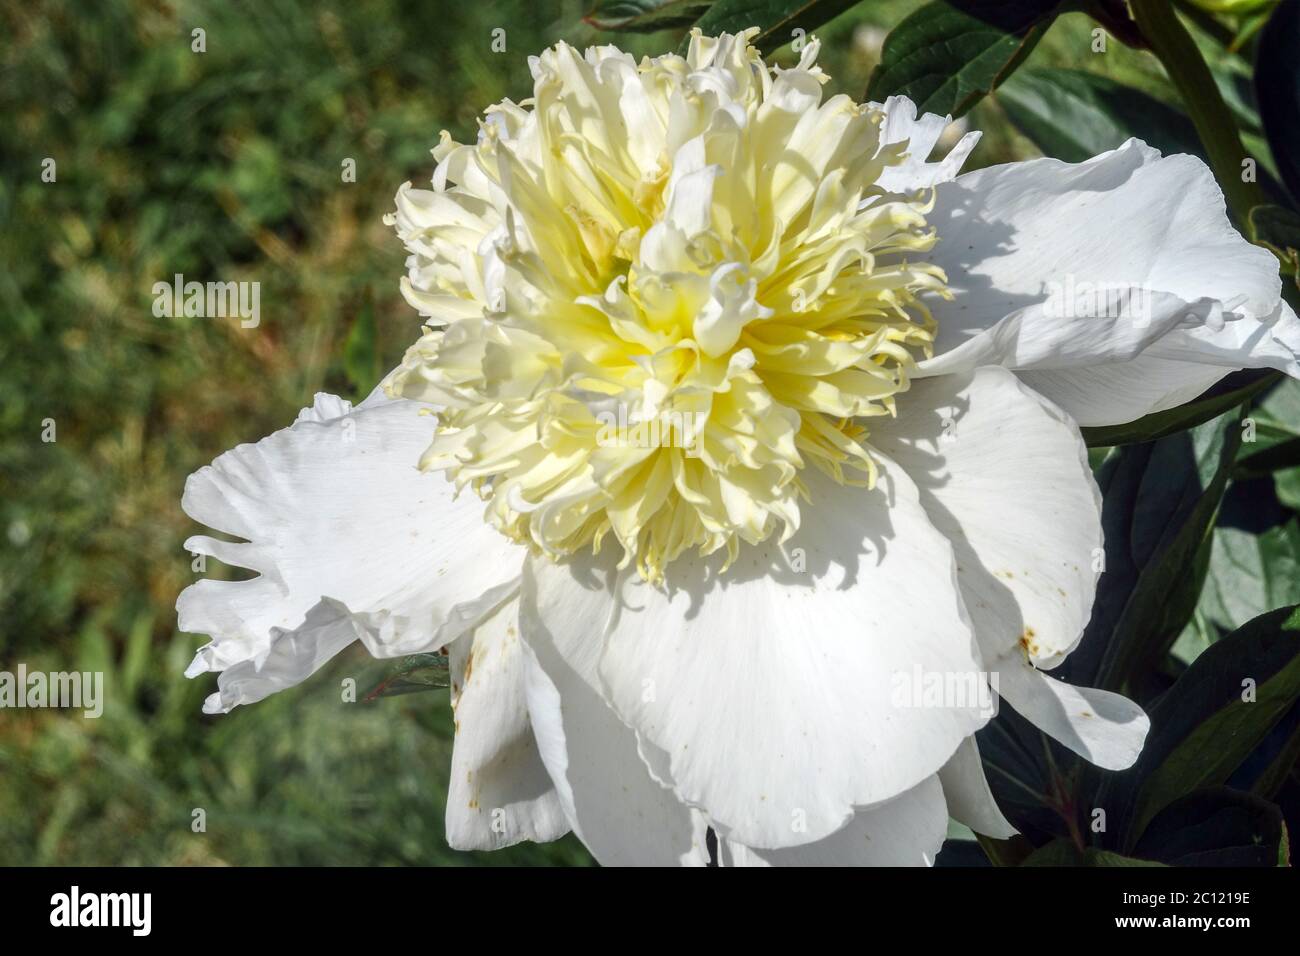 White Peony flower 'Cheddar Gold' Stock Photo